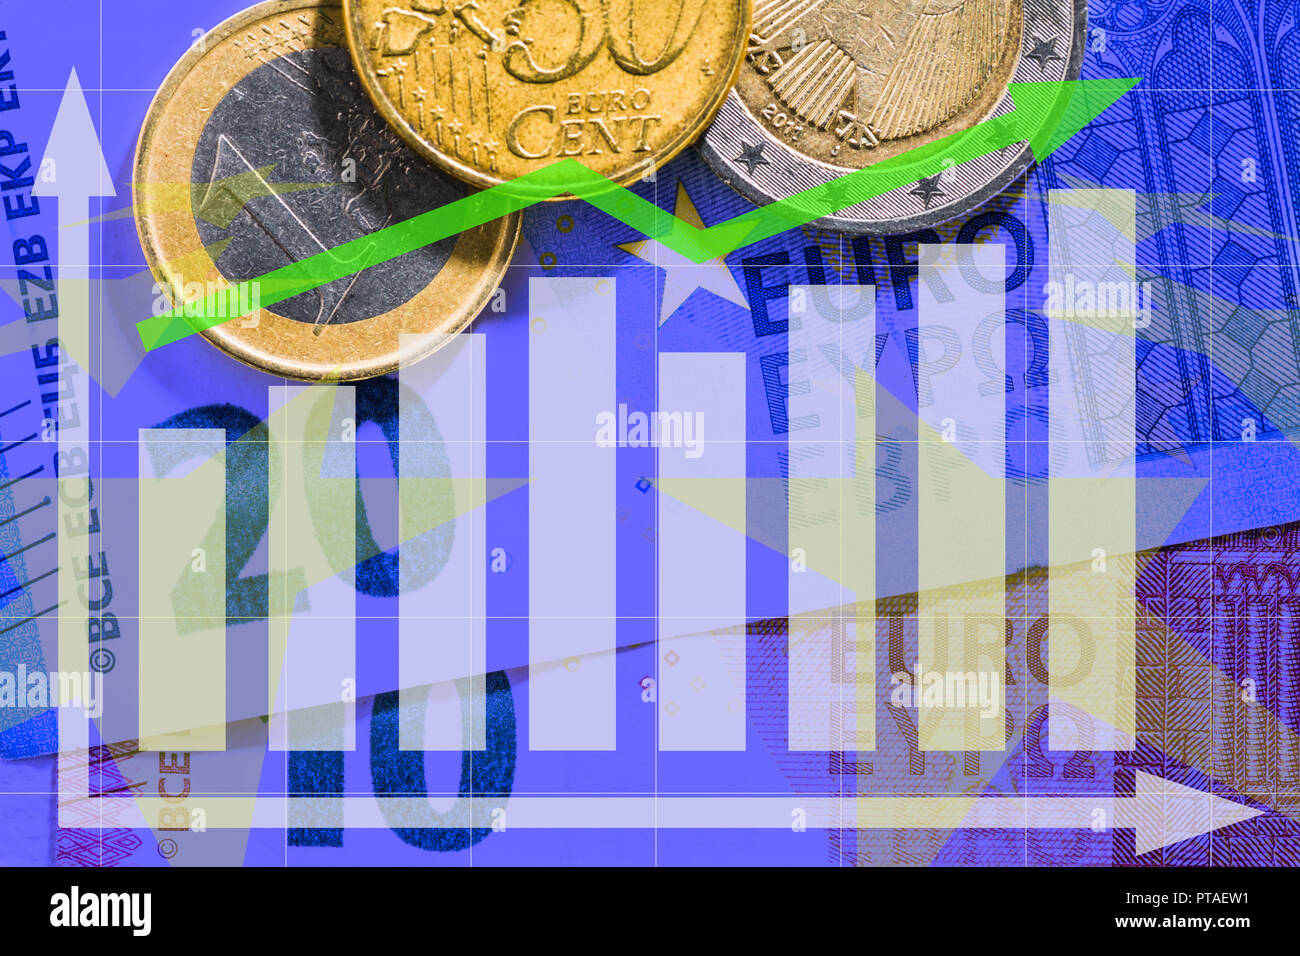 Euro notes and coins with diagram Stock Photo